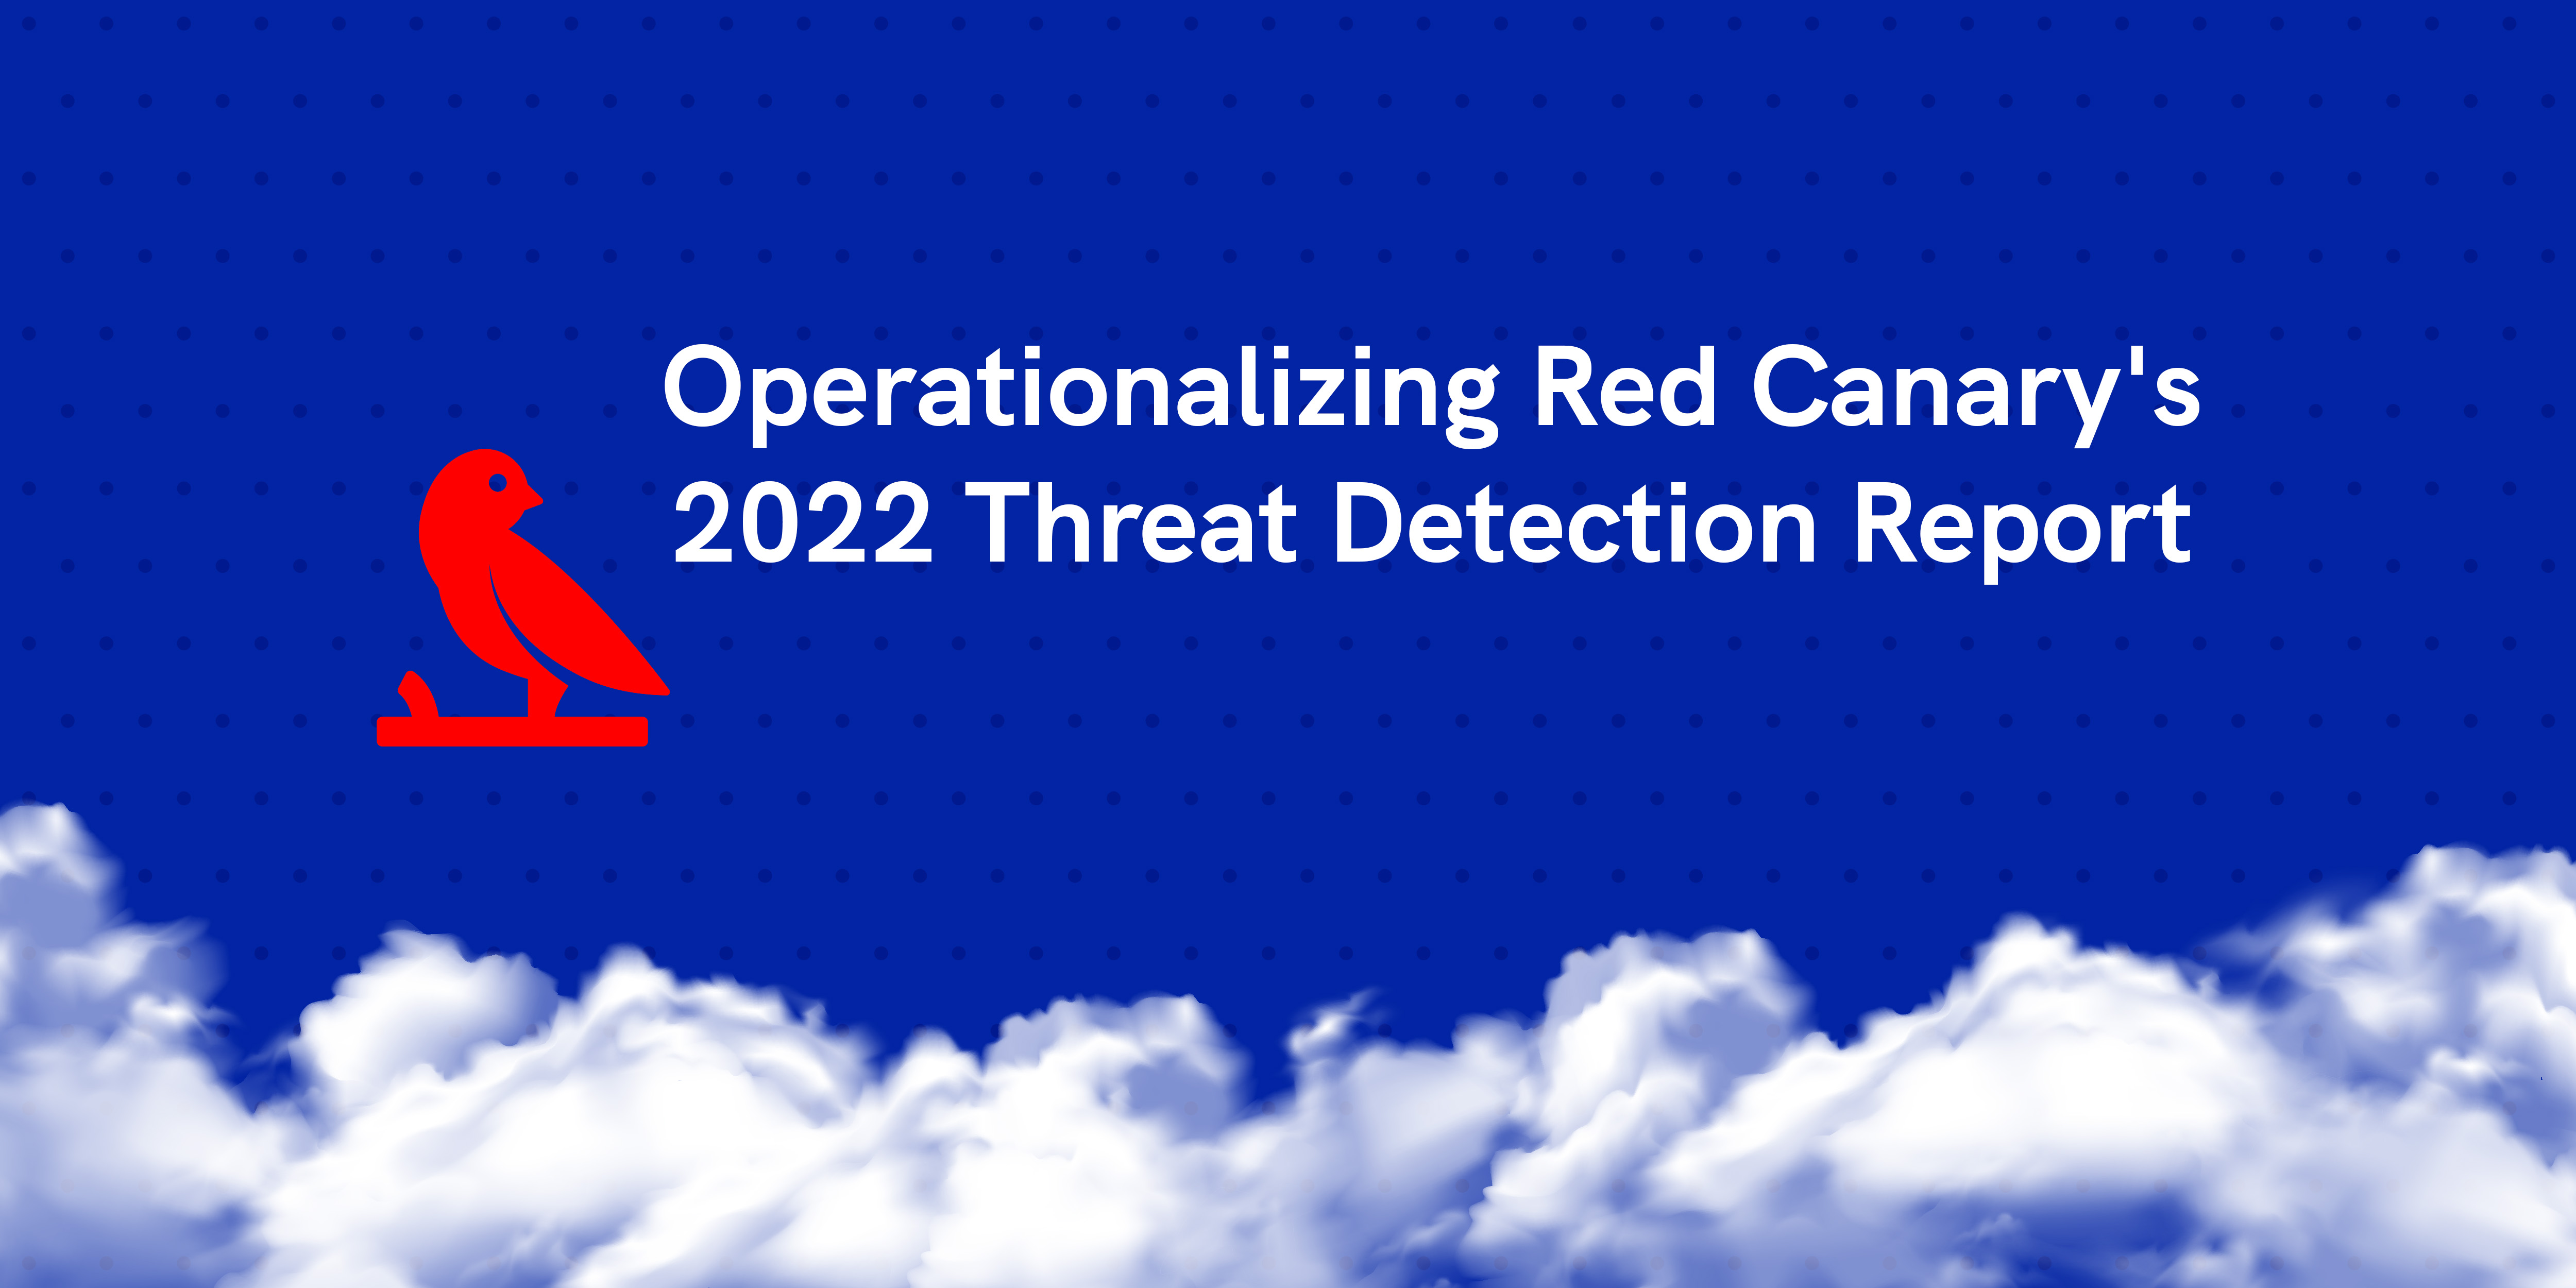 Operationalizing Red Canary's 2022 Threat Detection Report